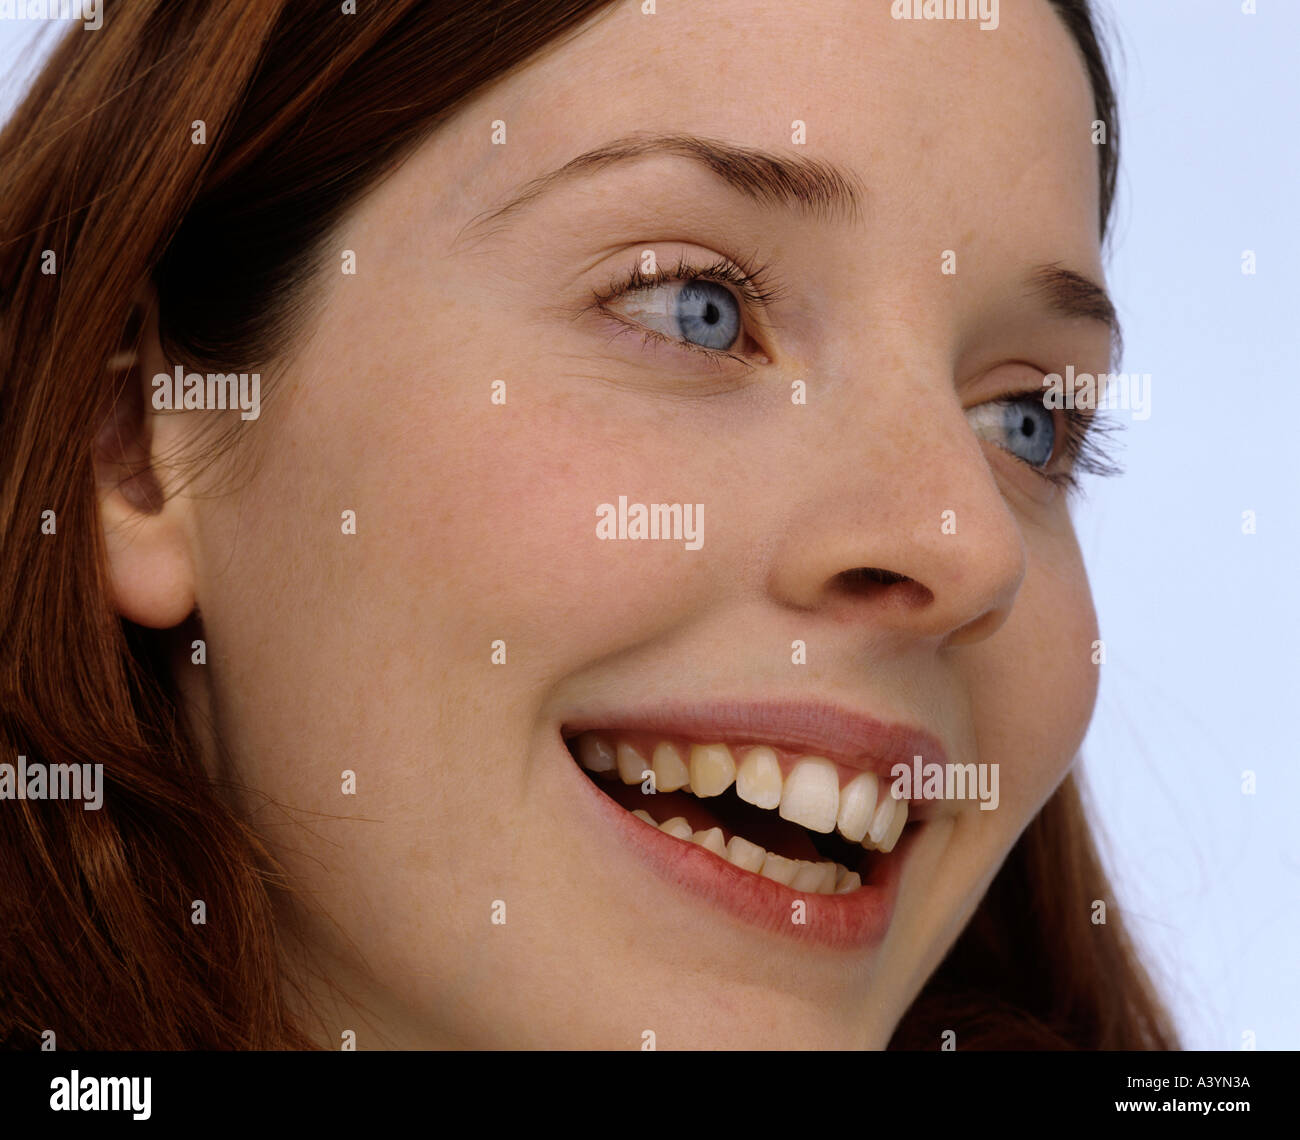 profile of smiling young woman with blue eyes Stock Photo